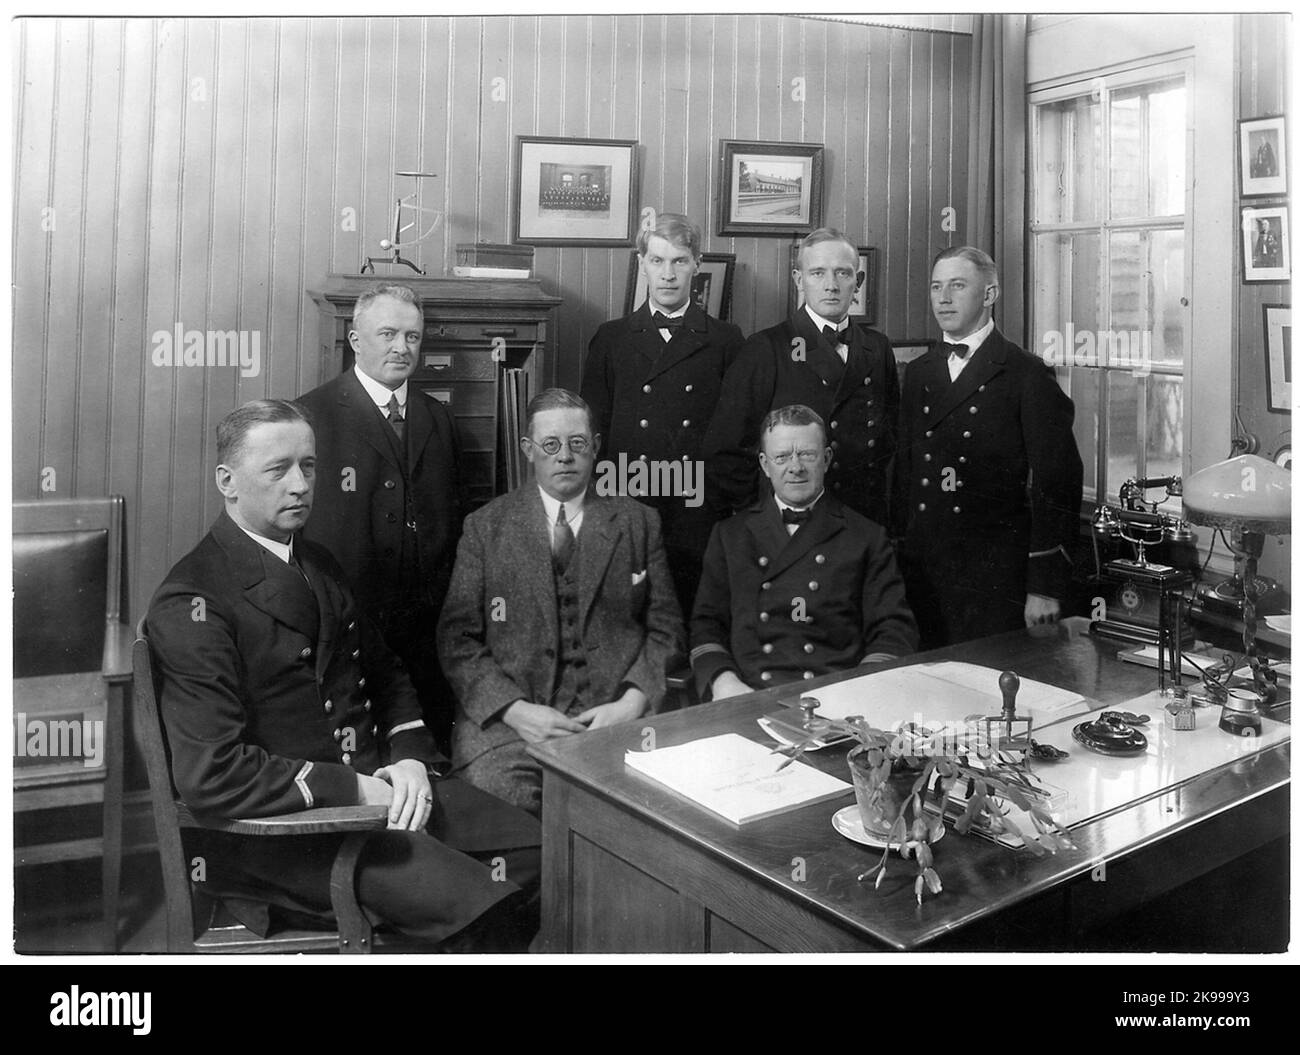 Group photo on the staff with the station inspector Kull. Stock Photo